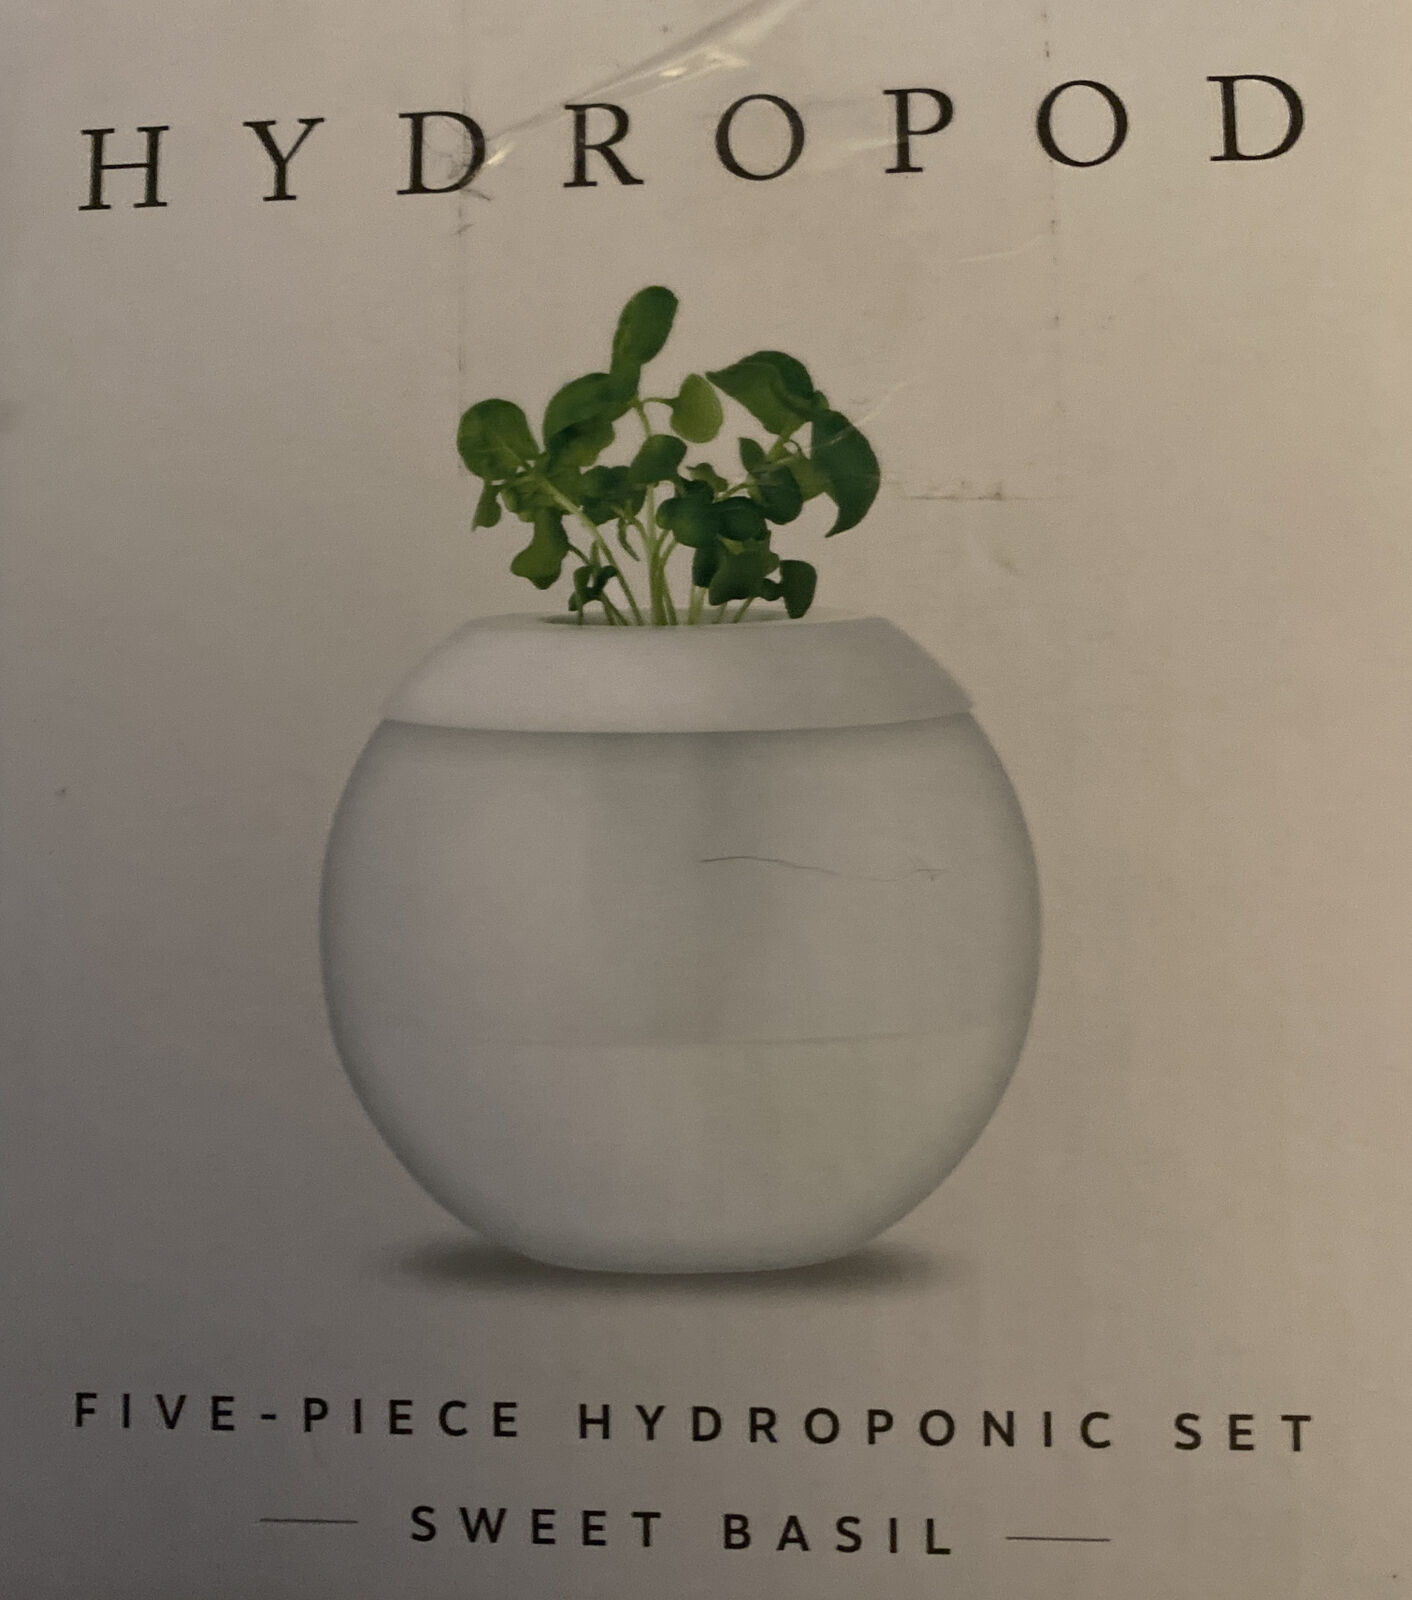 Rare DELL TECHNOLOGIES Faxit HYDROPOD Five Piece Hydroponic Set Sweet Basil